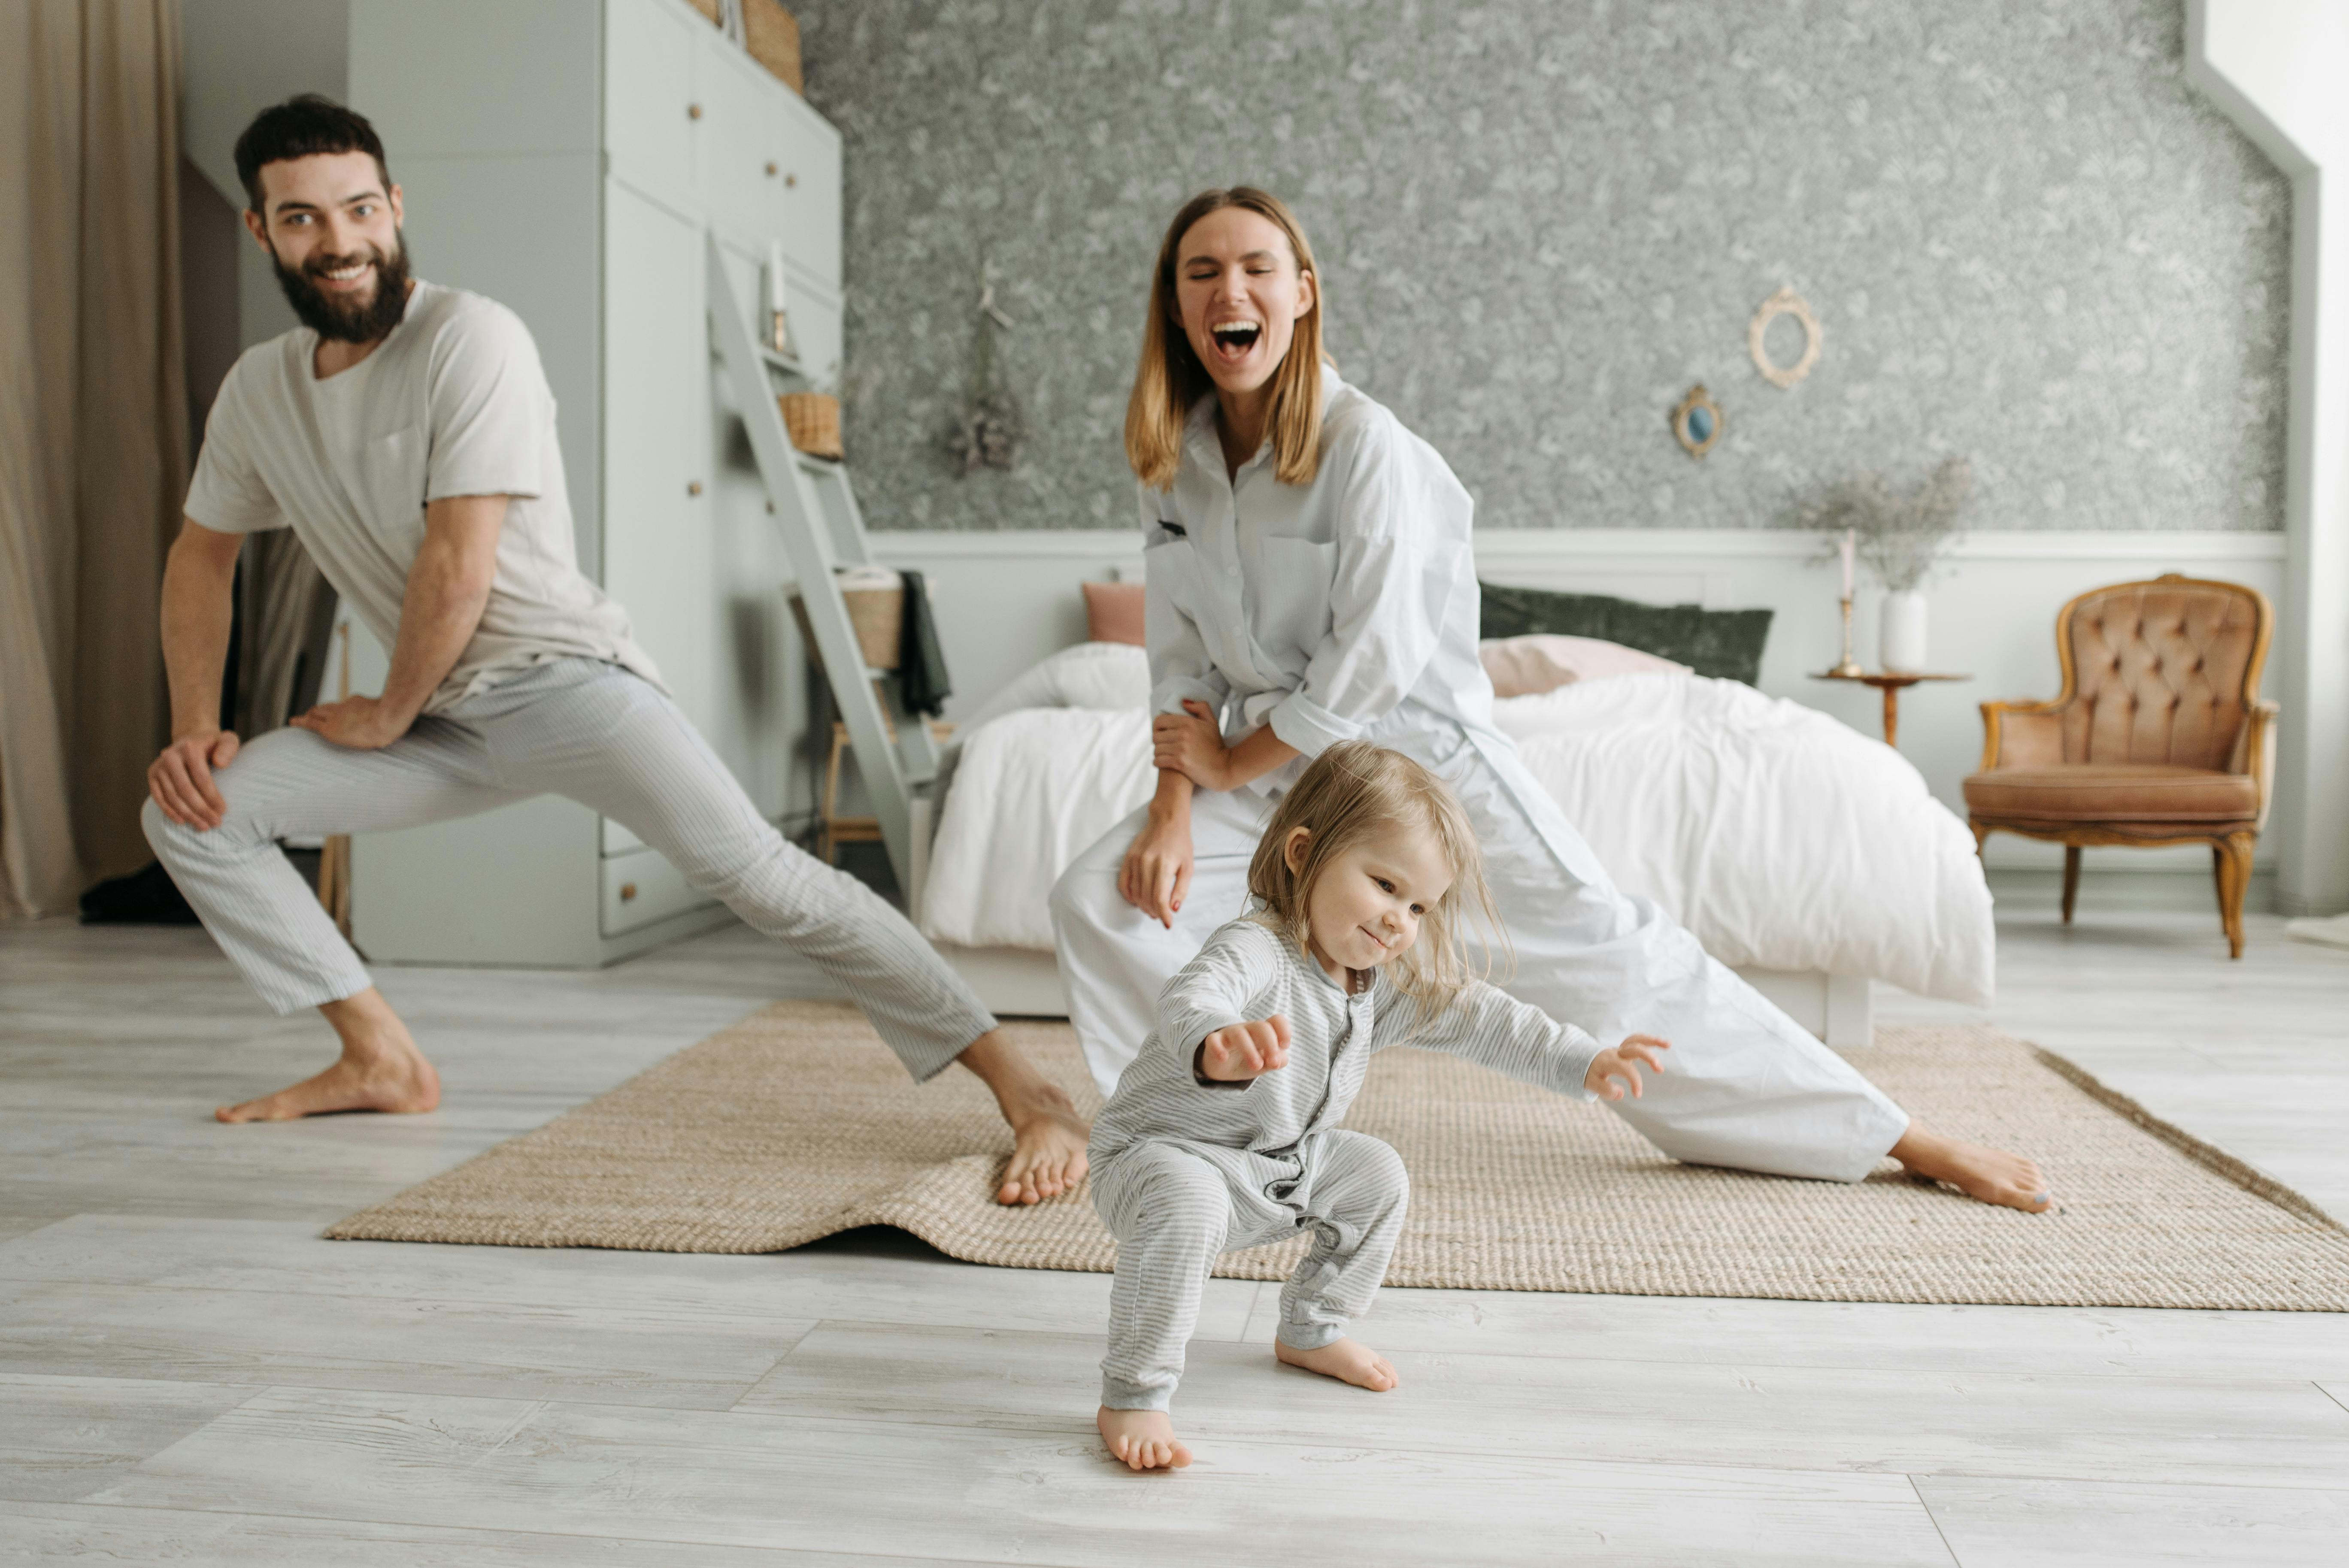 A mom, dad, and their small daughter doing stretches | Source: Pexels